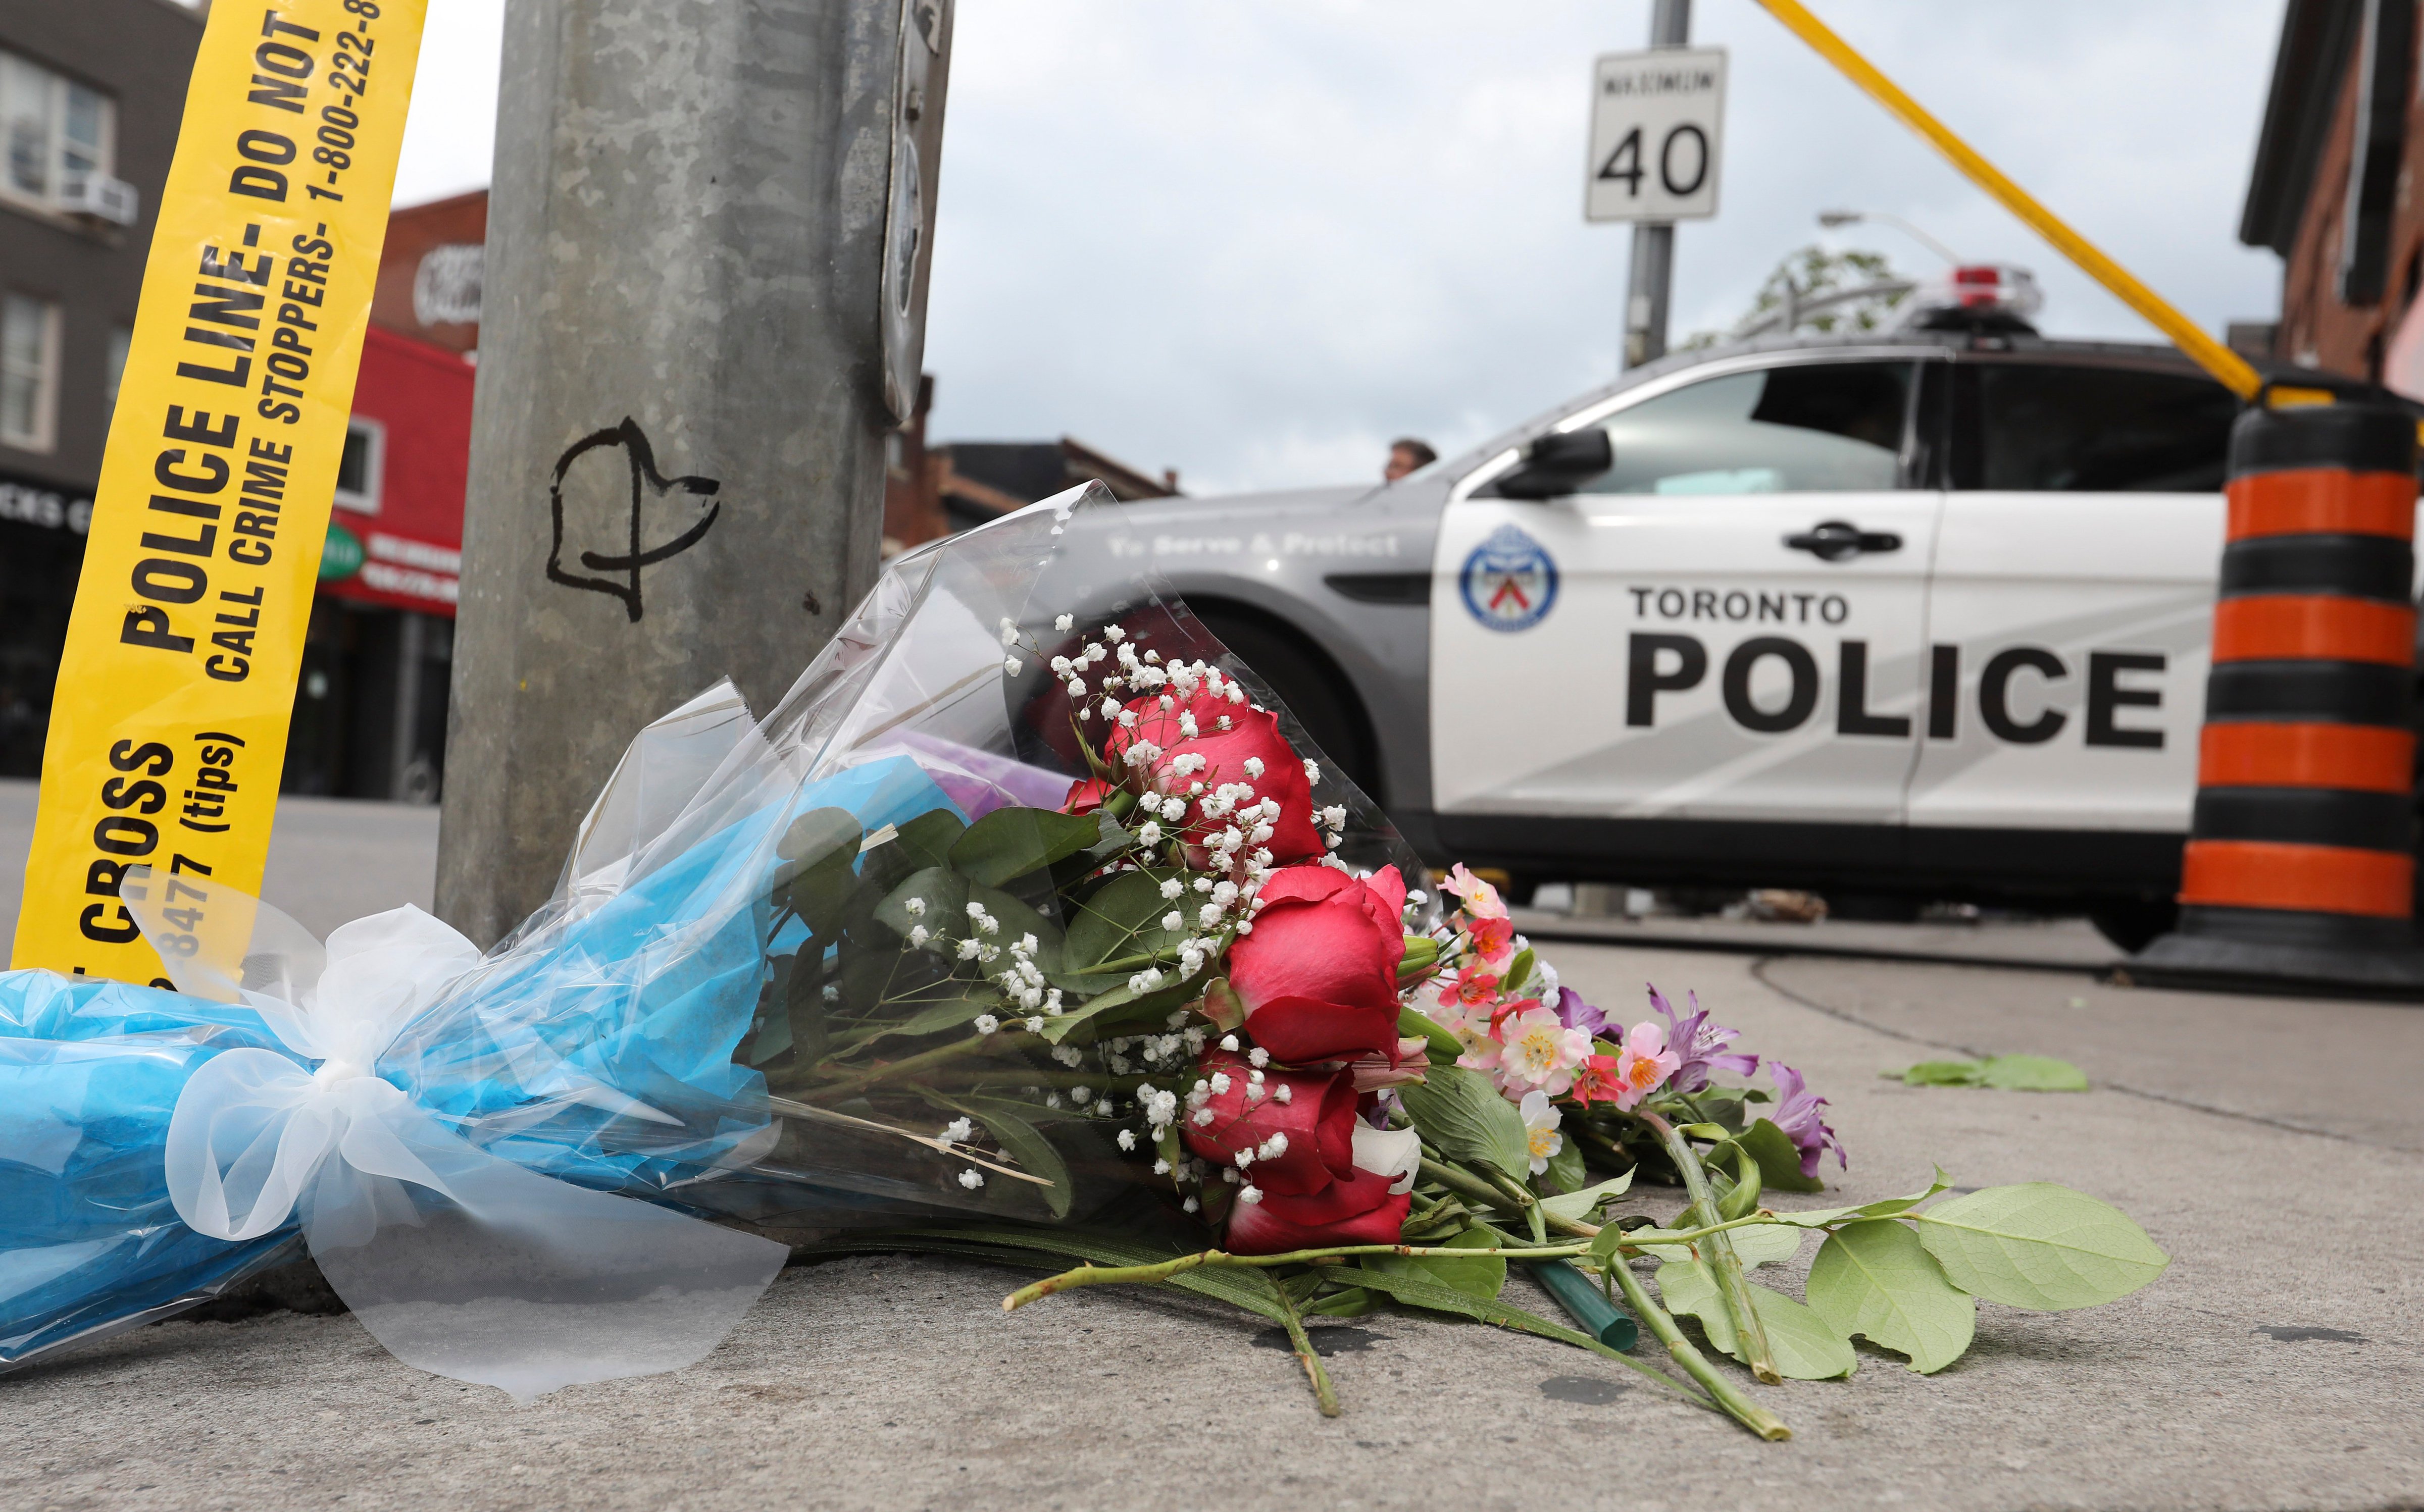 A makeshift memorial commemorates a mass shooting that killed two on Danforth Avenue in Toronto, Ontario on July 22, 2018. (Richard Lautens—Toronto Star/Getty Images)